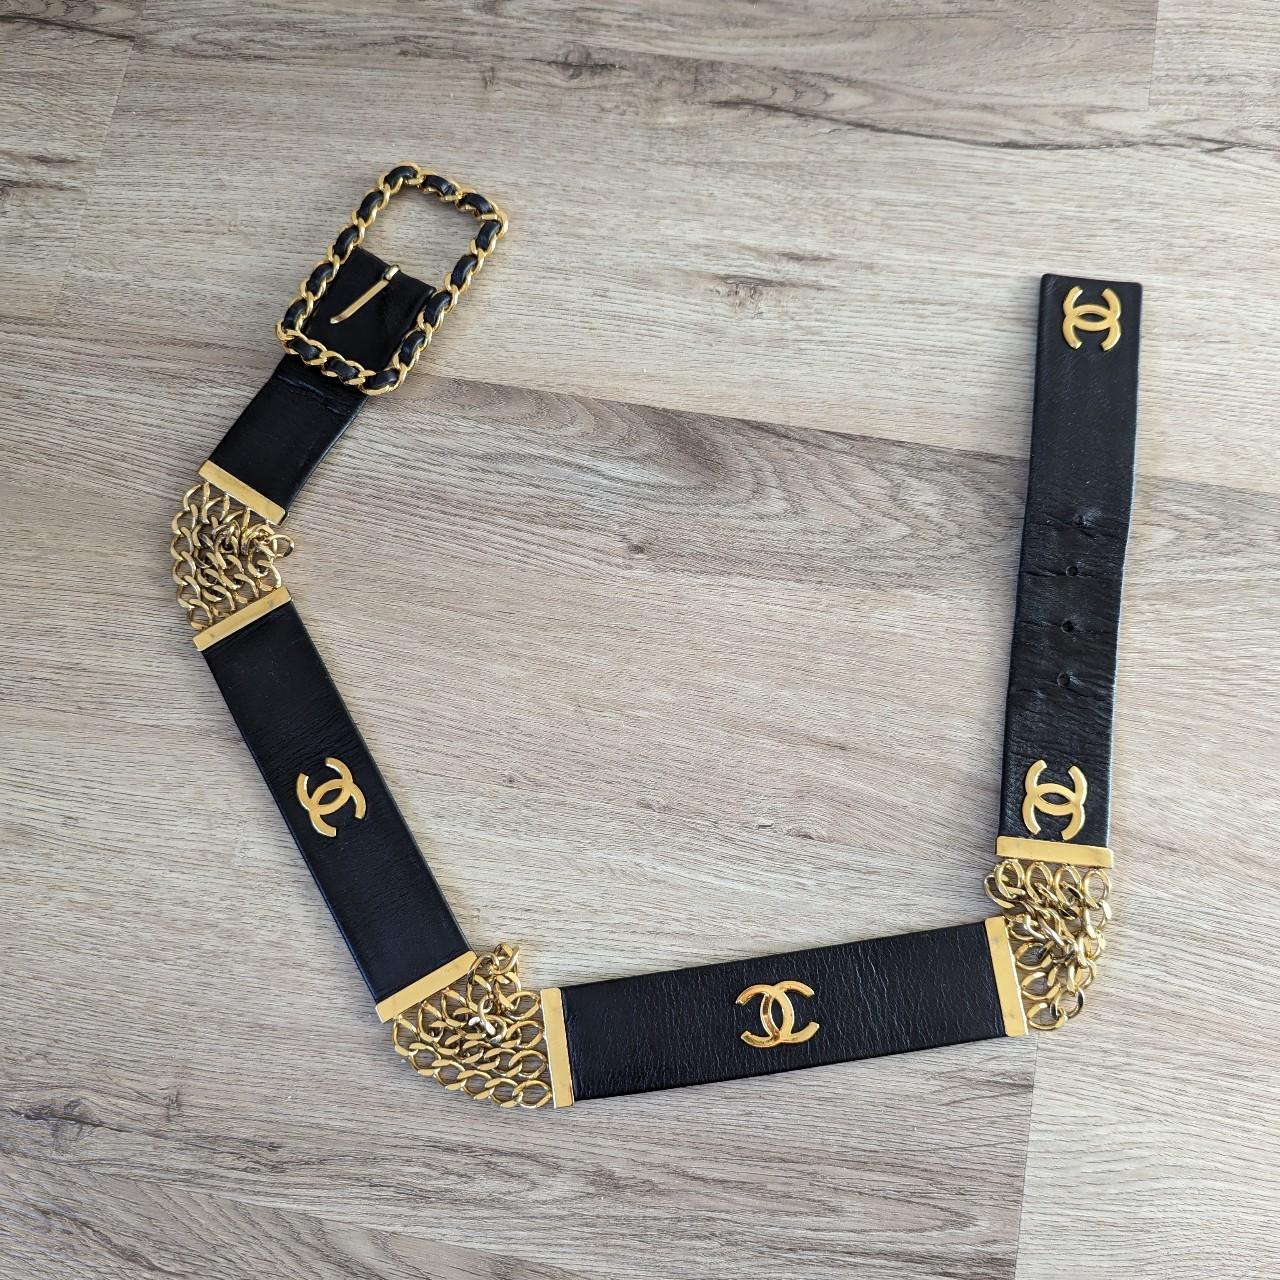 Authentic chanel belt/ necklace. Comes with box and - Depop